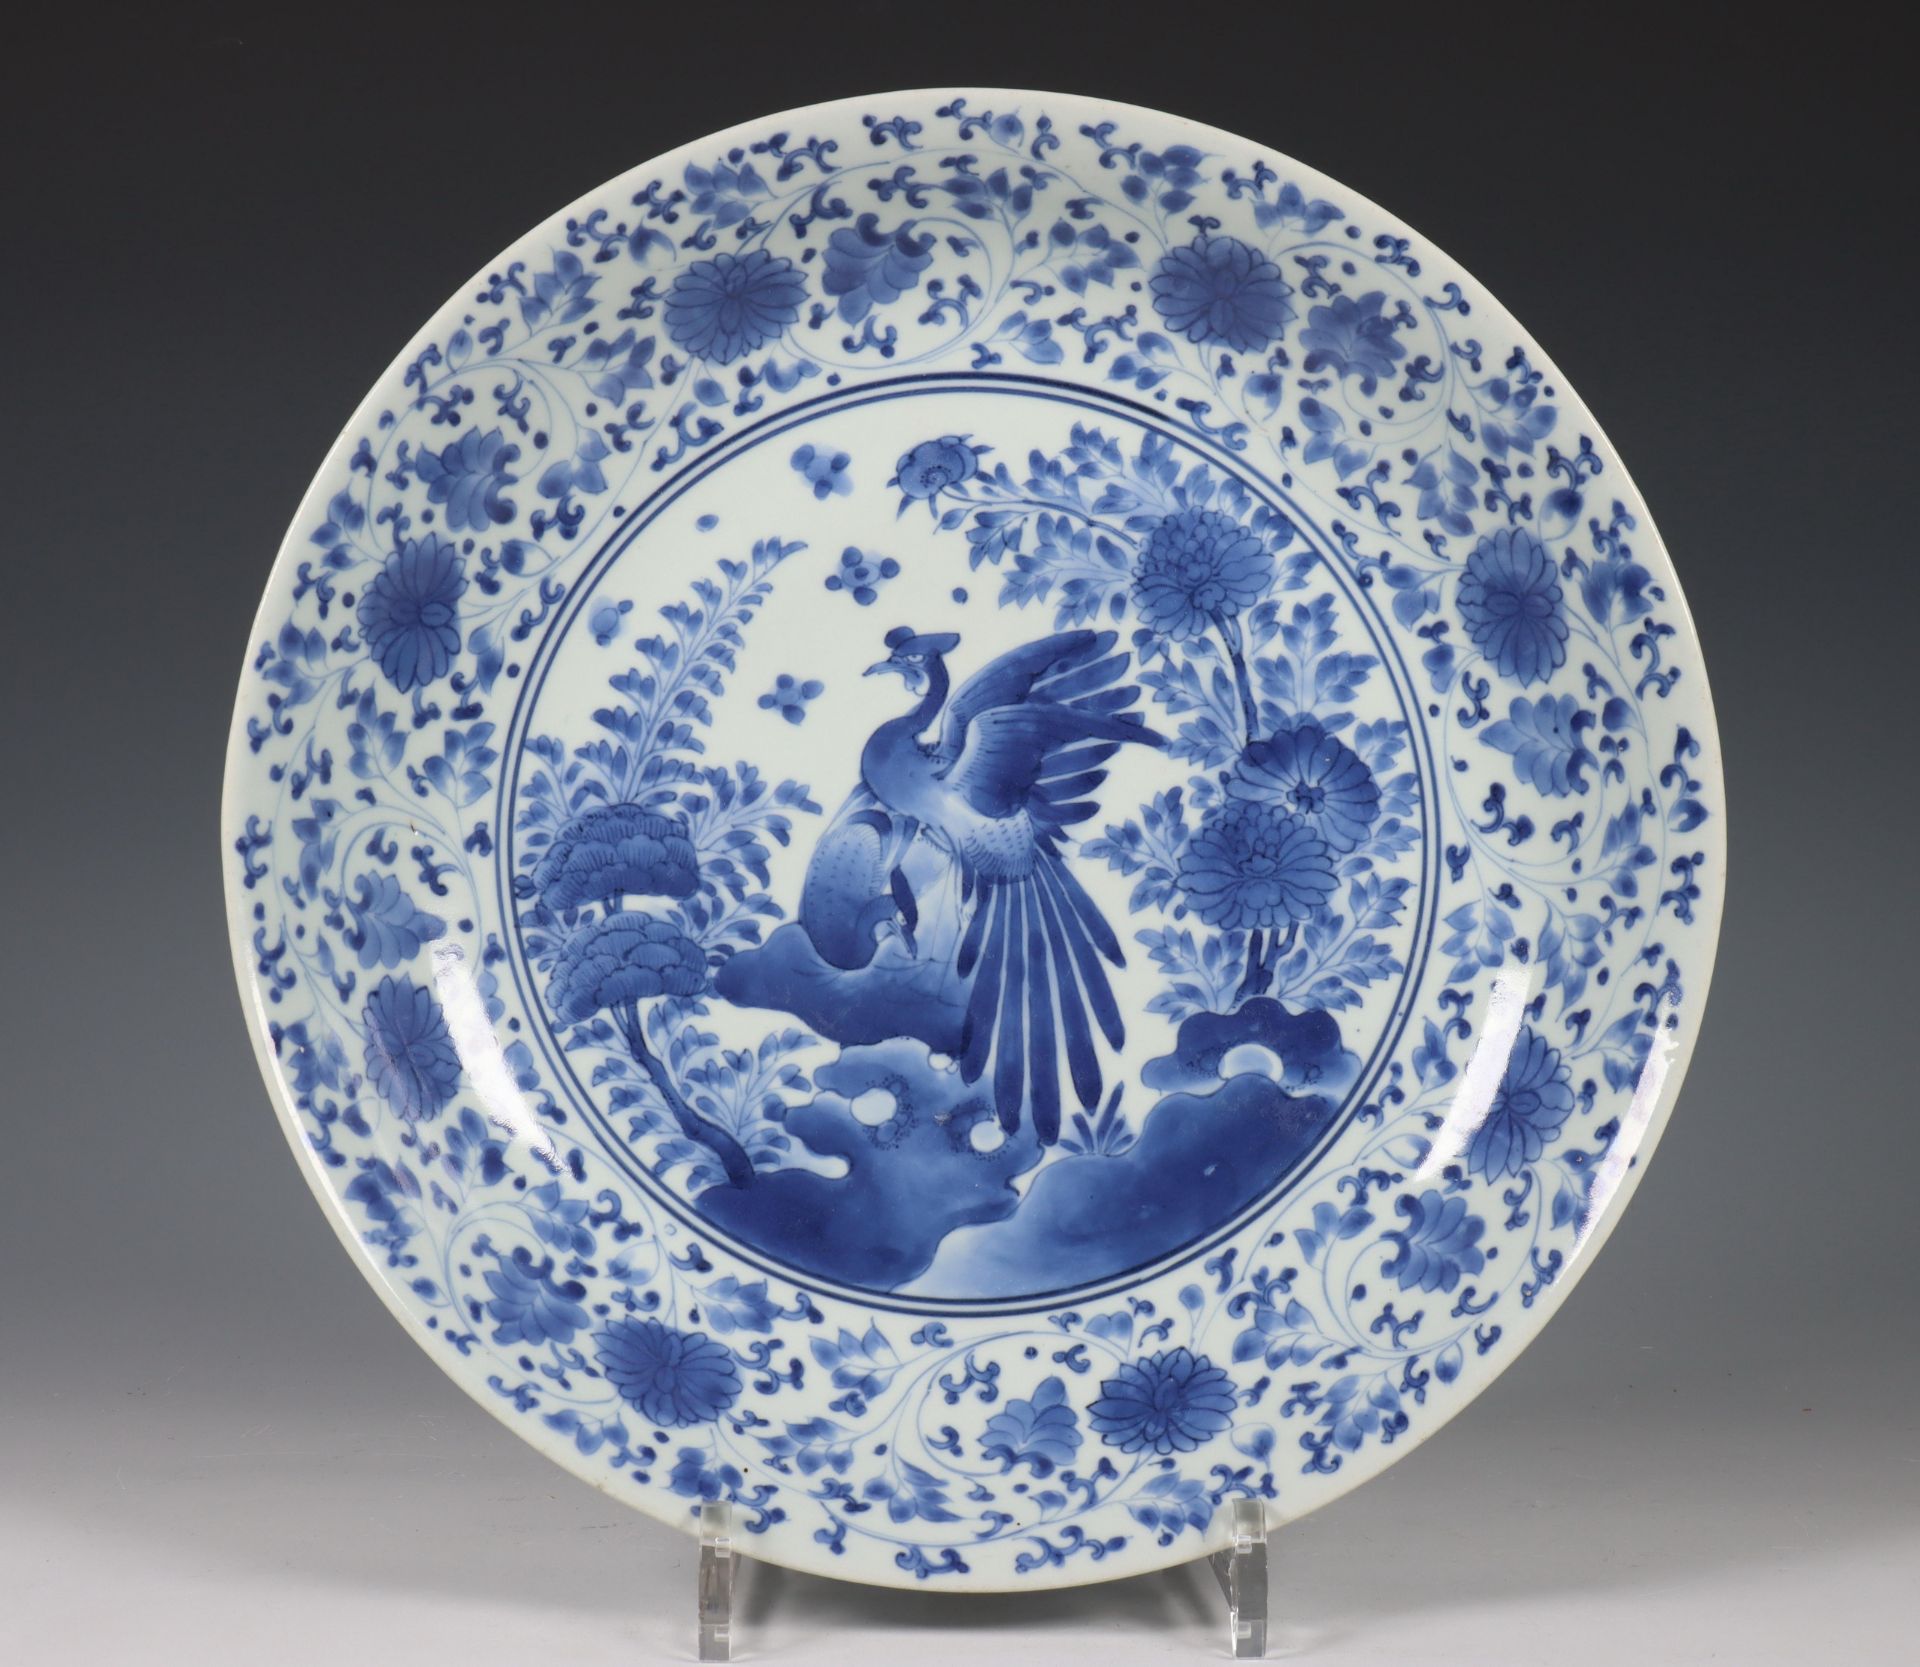 Japan, blue and white porcelain Kakiemon-style dish, Edo period, painted with two ho-o birds in a